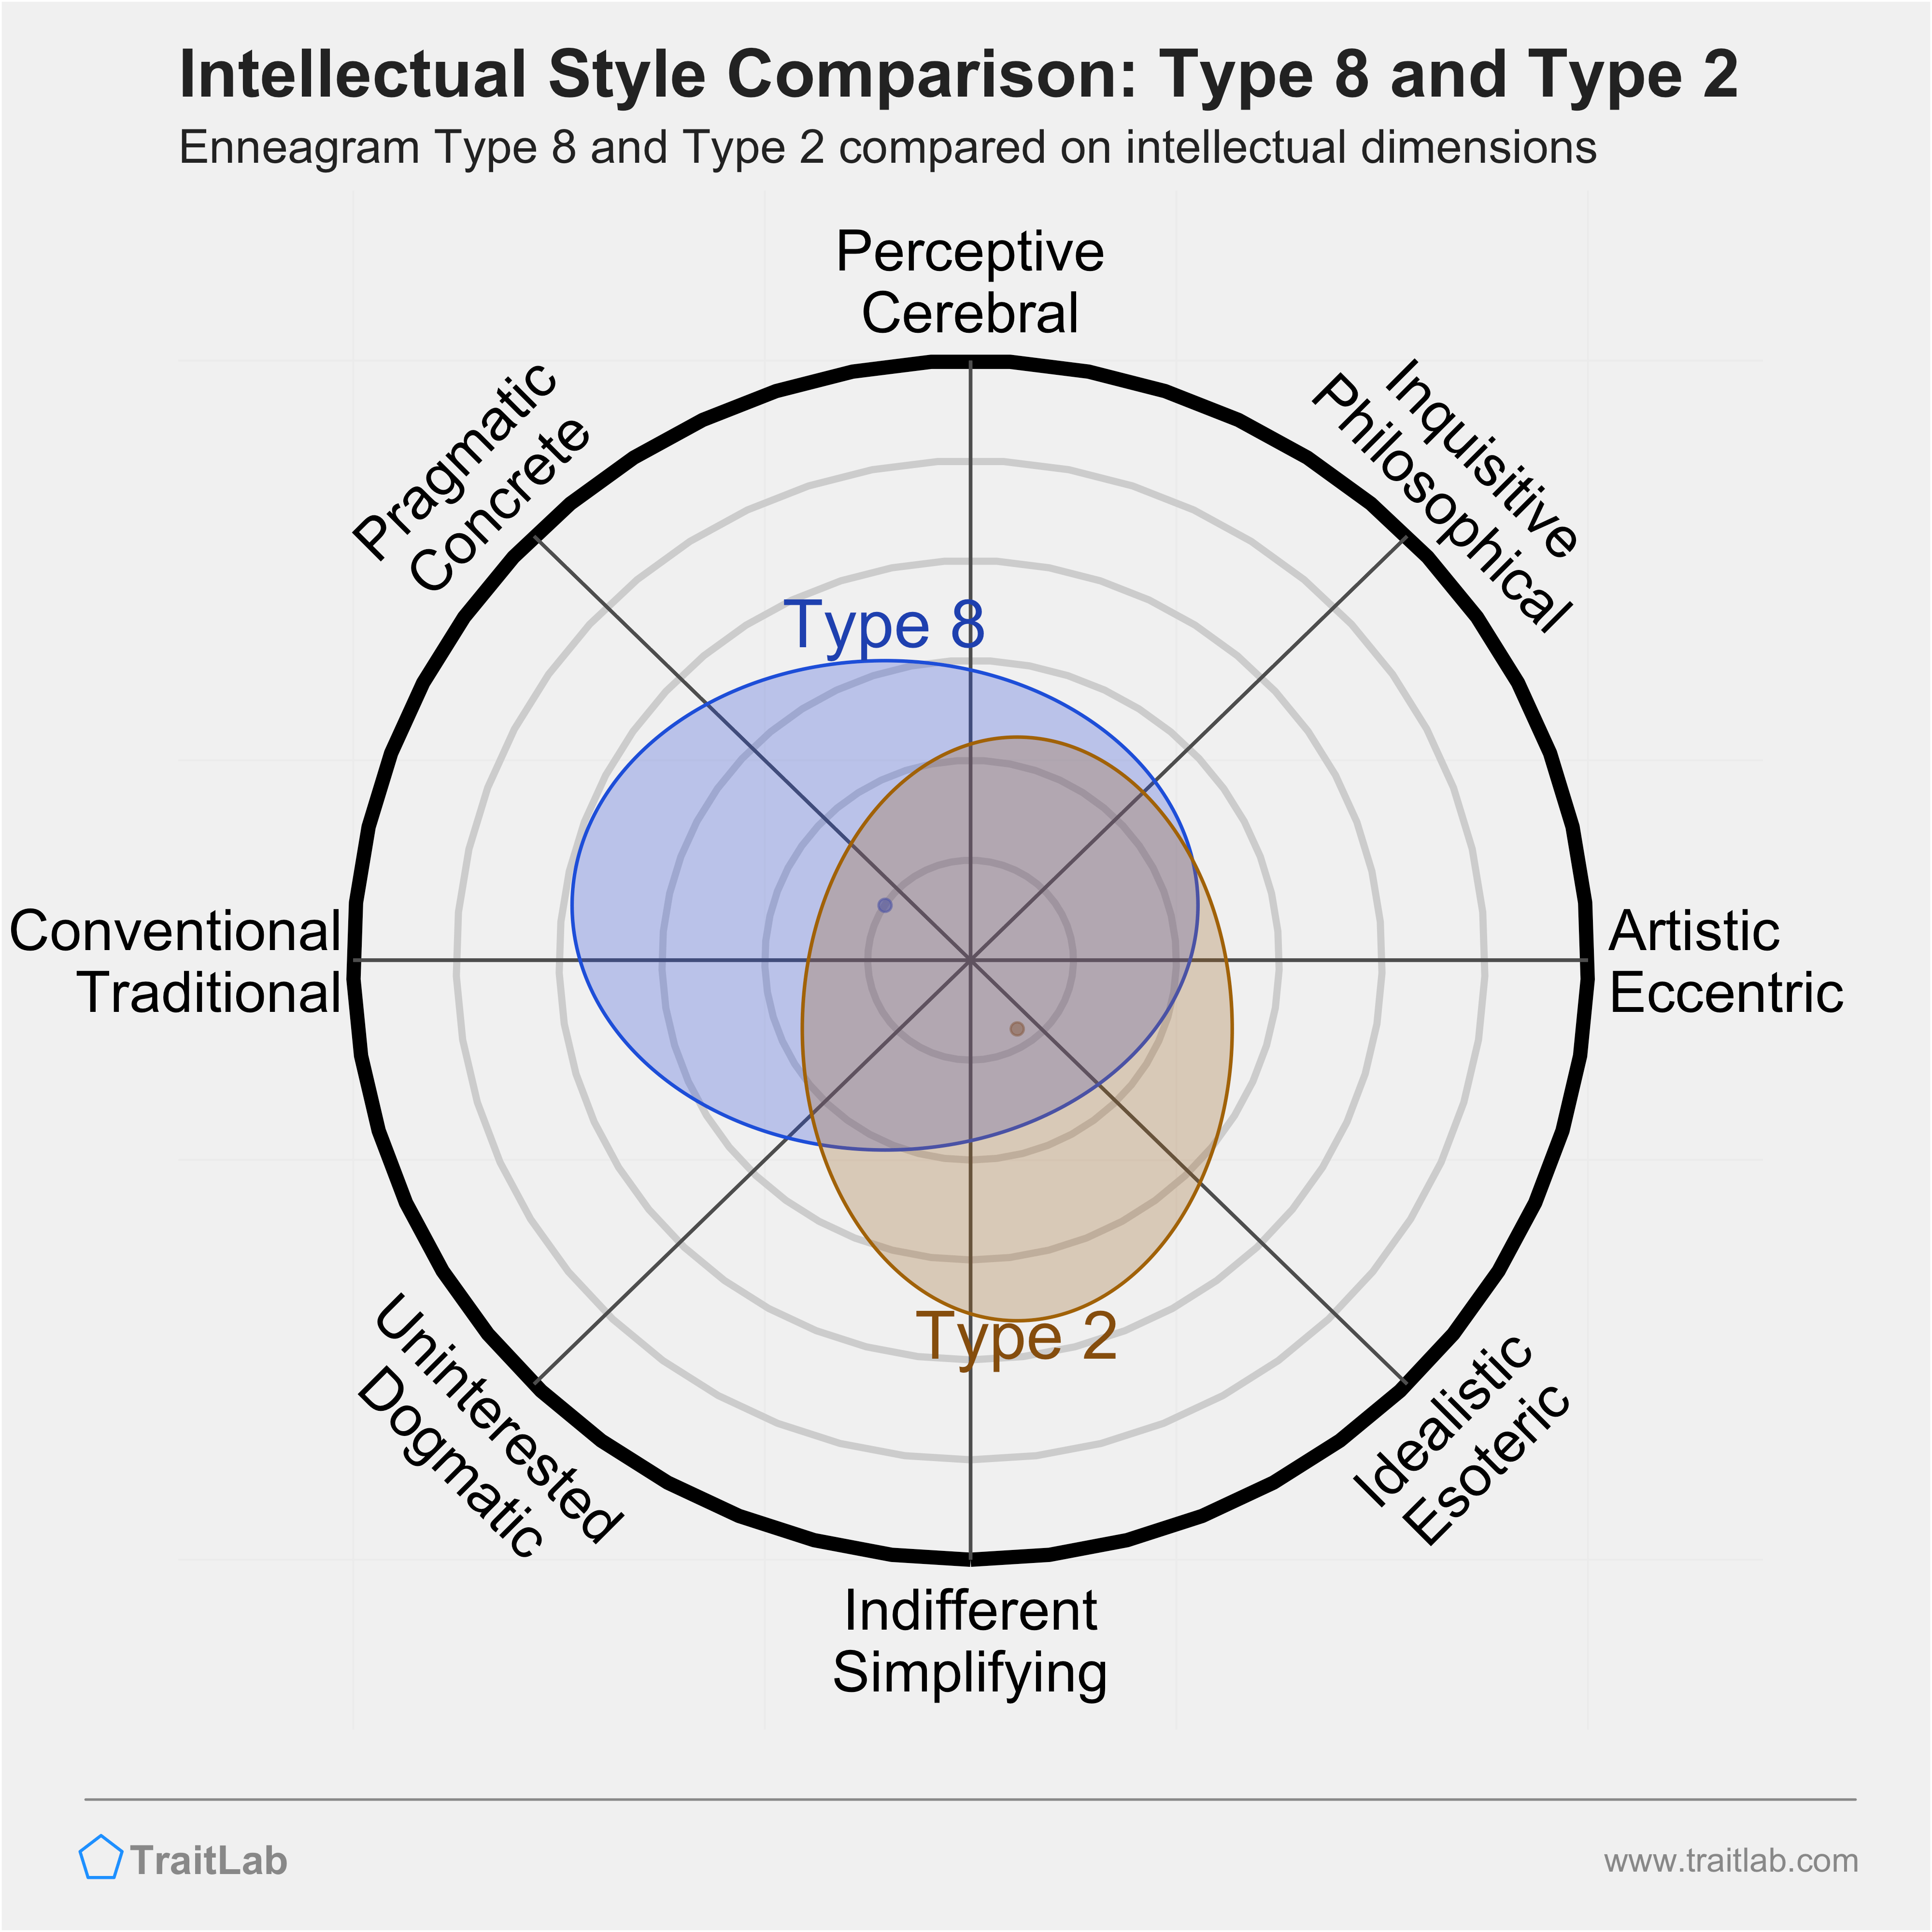 Type 8 and Type 2 comparison across intellectual dimensions